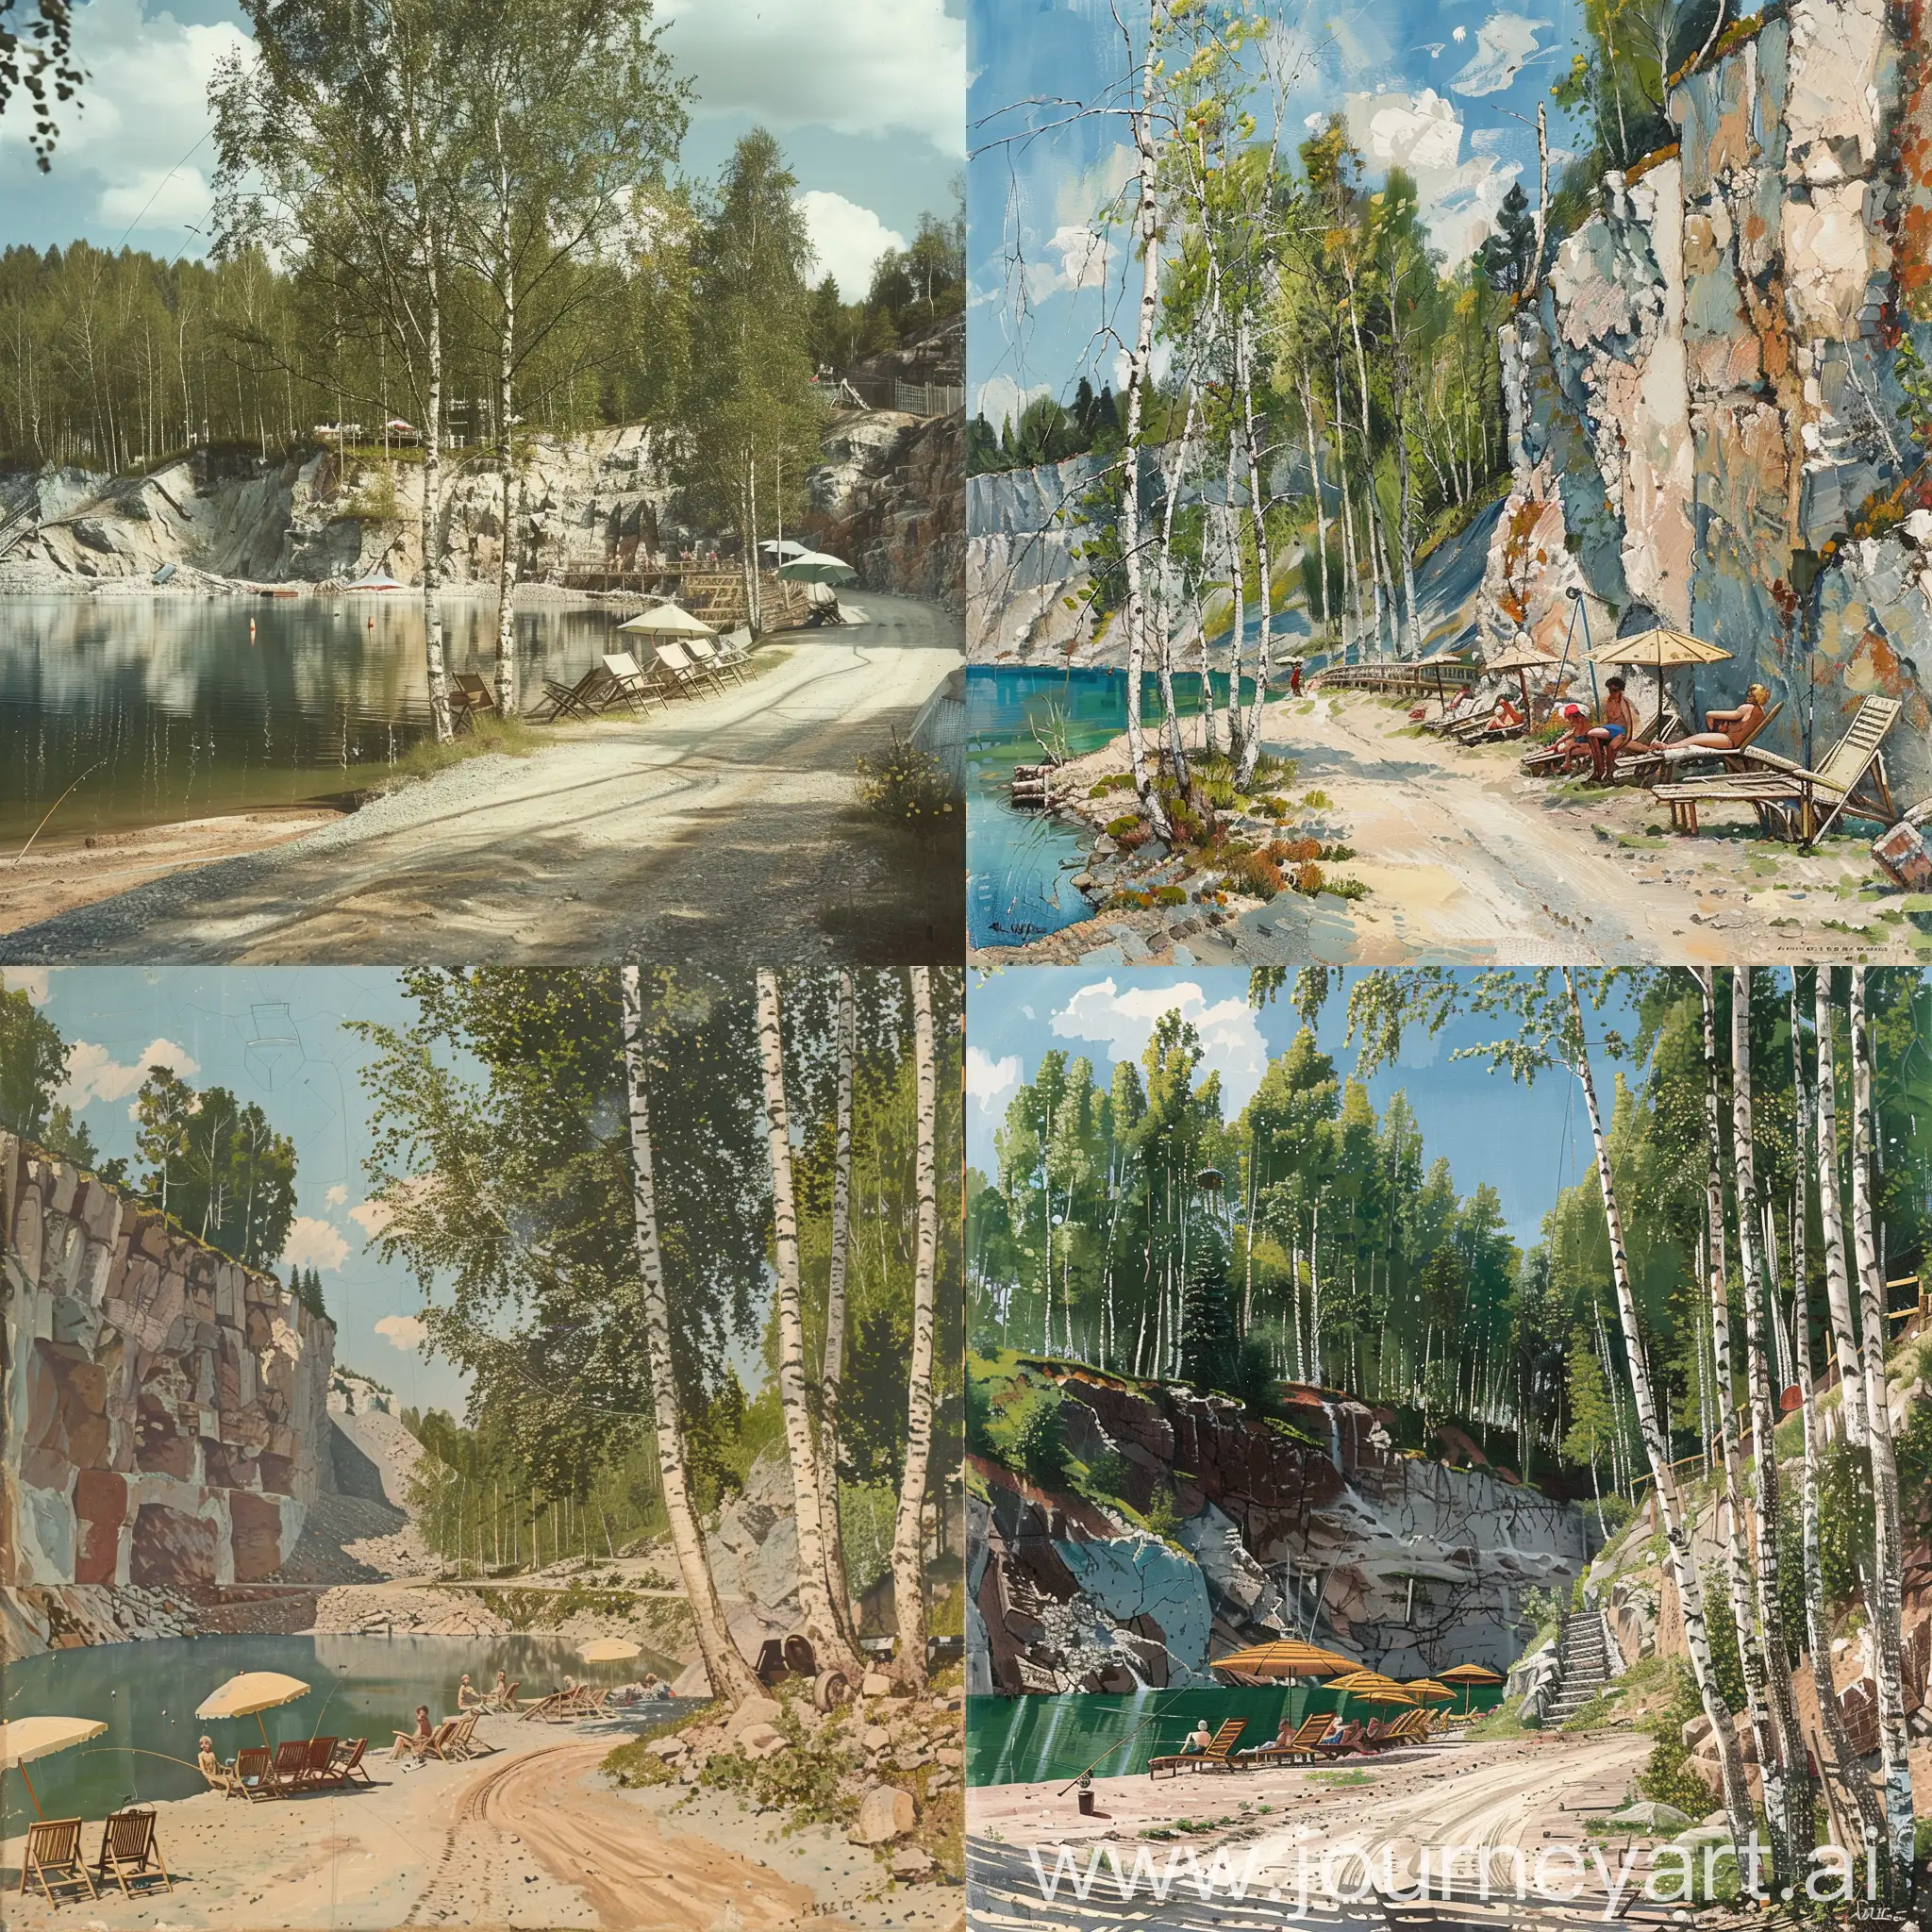 a quarry at a tourist base. birch trees grow nearby. a dirt road. tourists are fishing on the shore. wooden deck chairs and umbrellas for sunbathers.